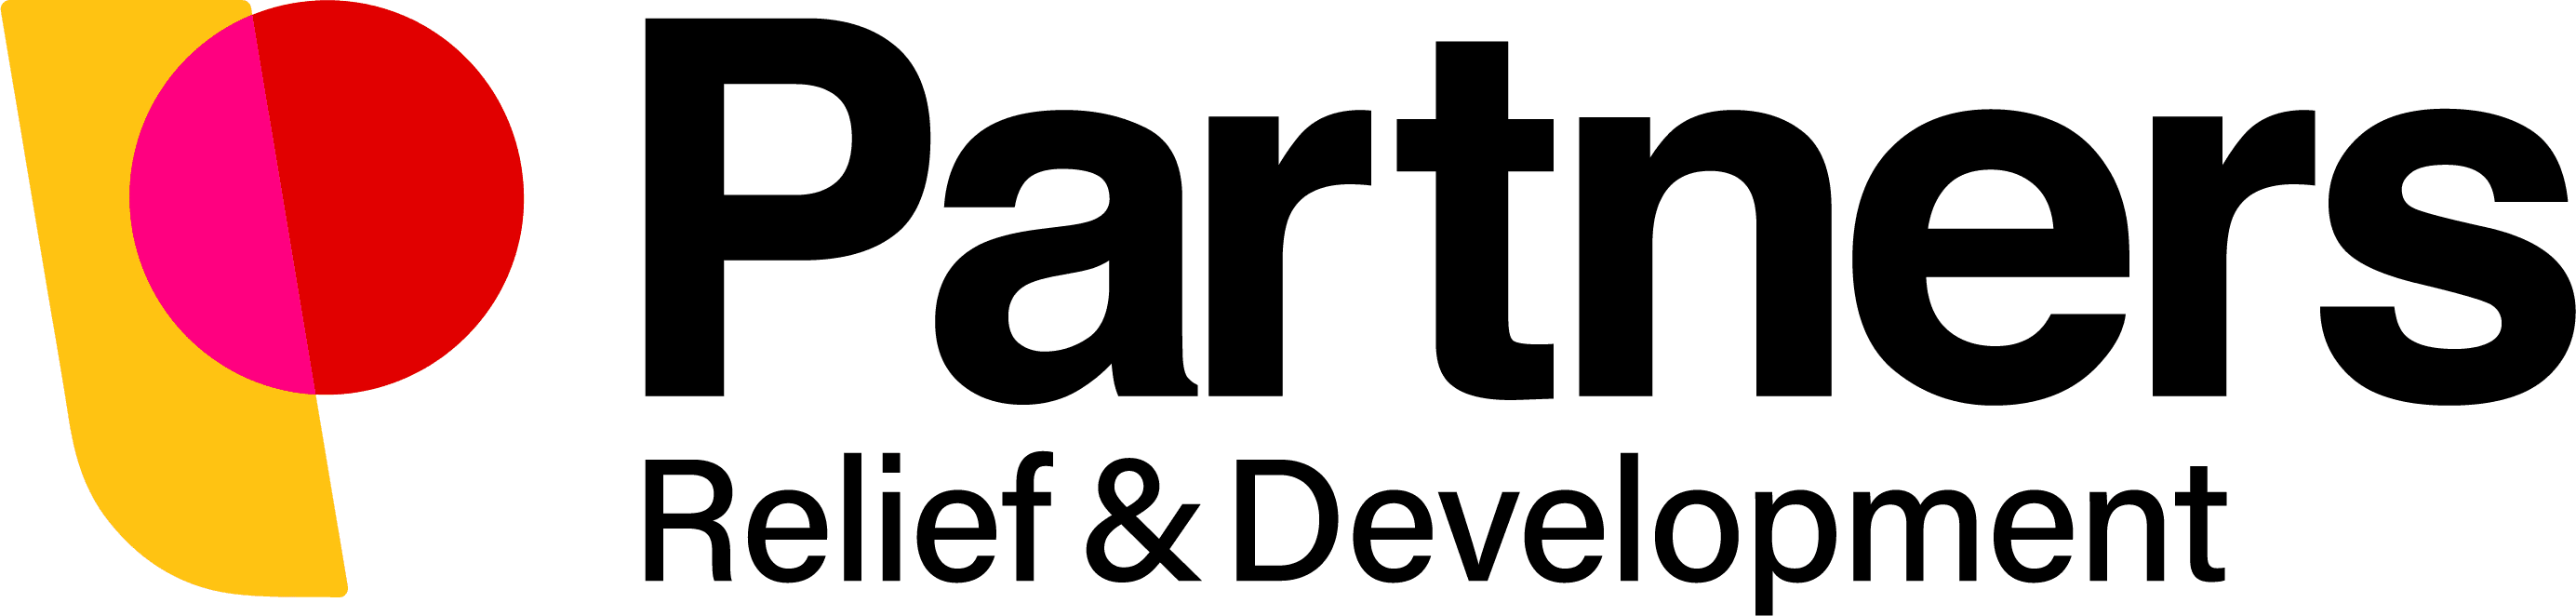 Partners relief and development logo